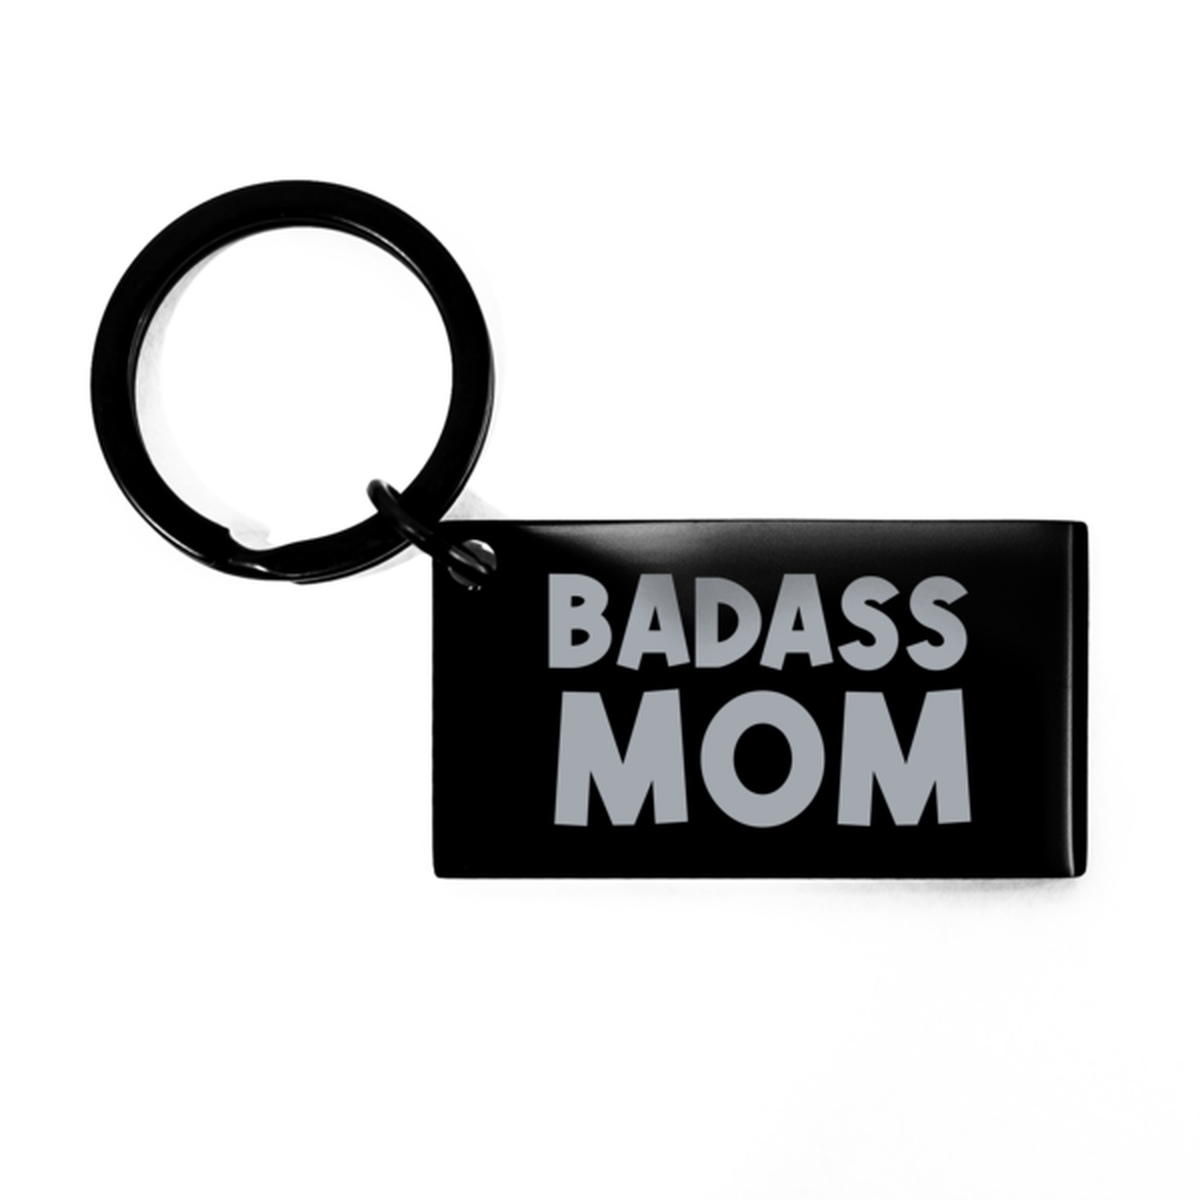 Mom Black Keychain, Badass Mom, Funny Family Gifts  Keyring For Mom From Son Daughter